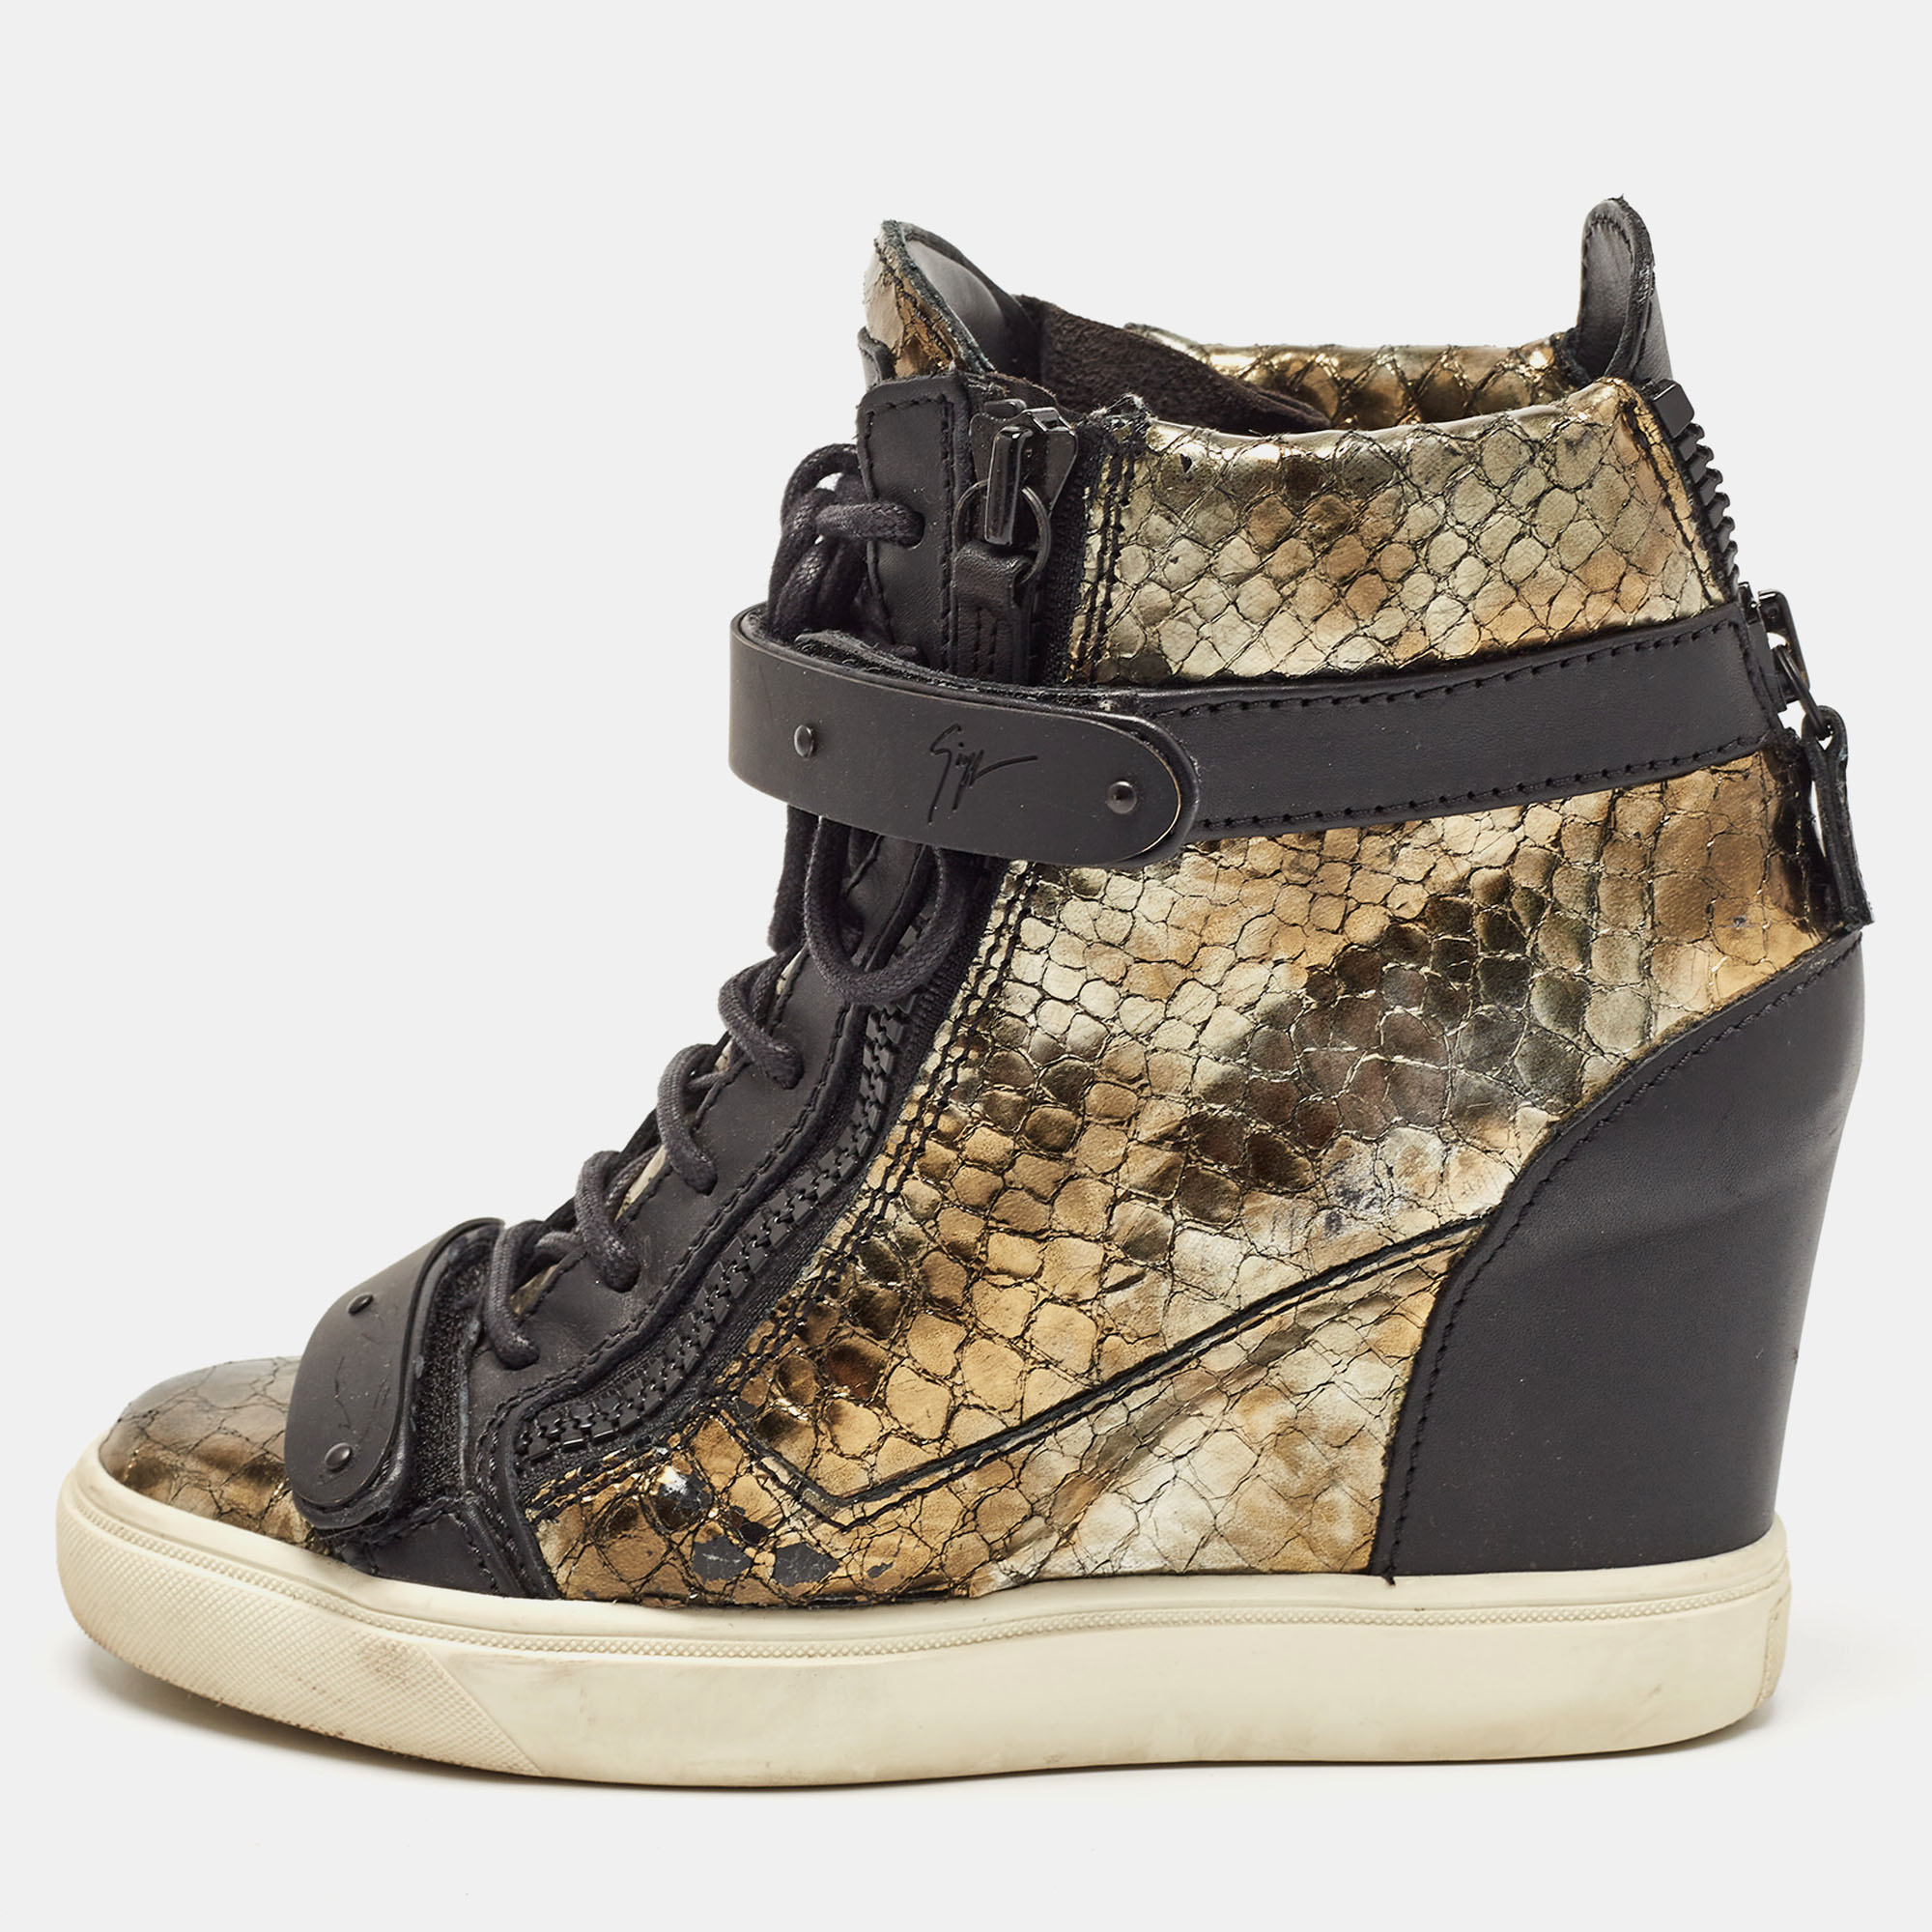 Pre-owned Giuseppe Zanotti Metallic Python Embossed Wedge Sneakers Size 38